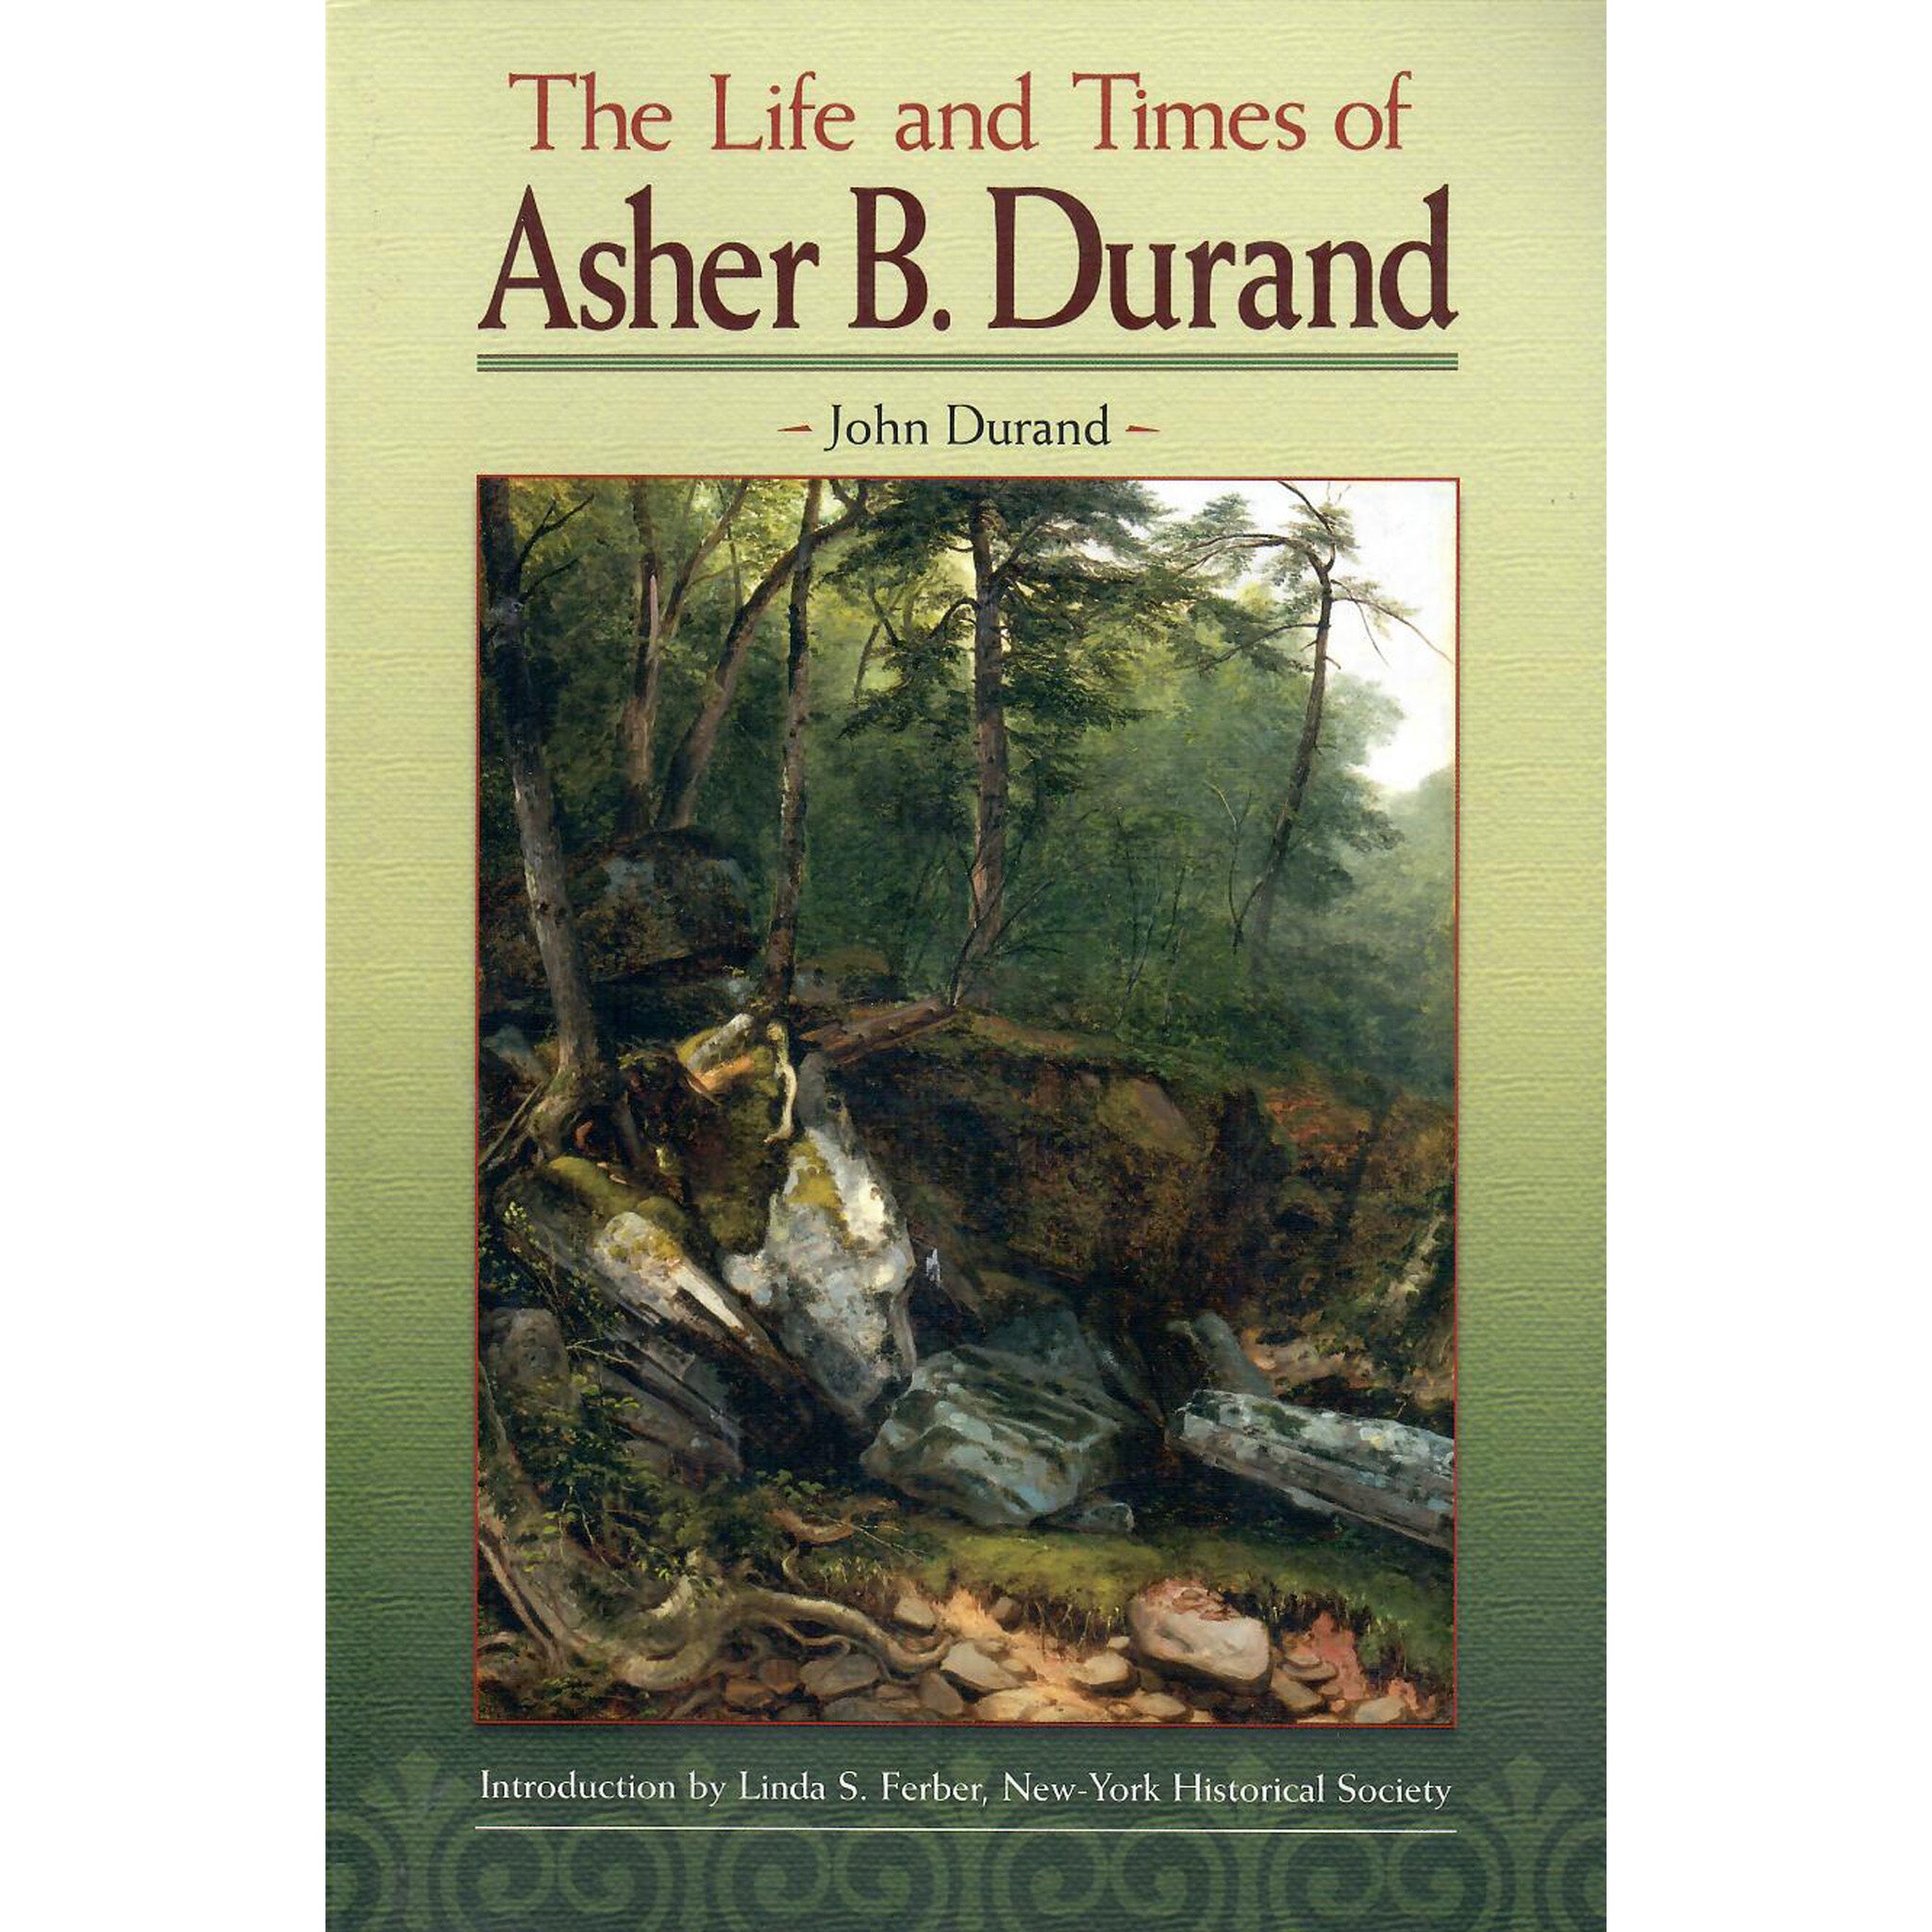 The Life and Times of Asher B. Durand